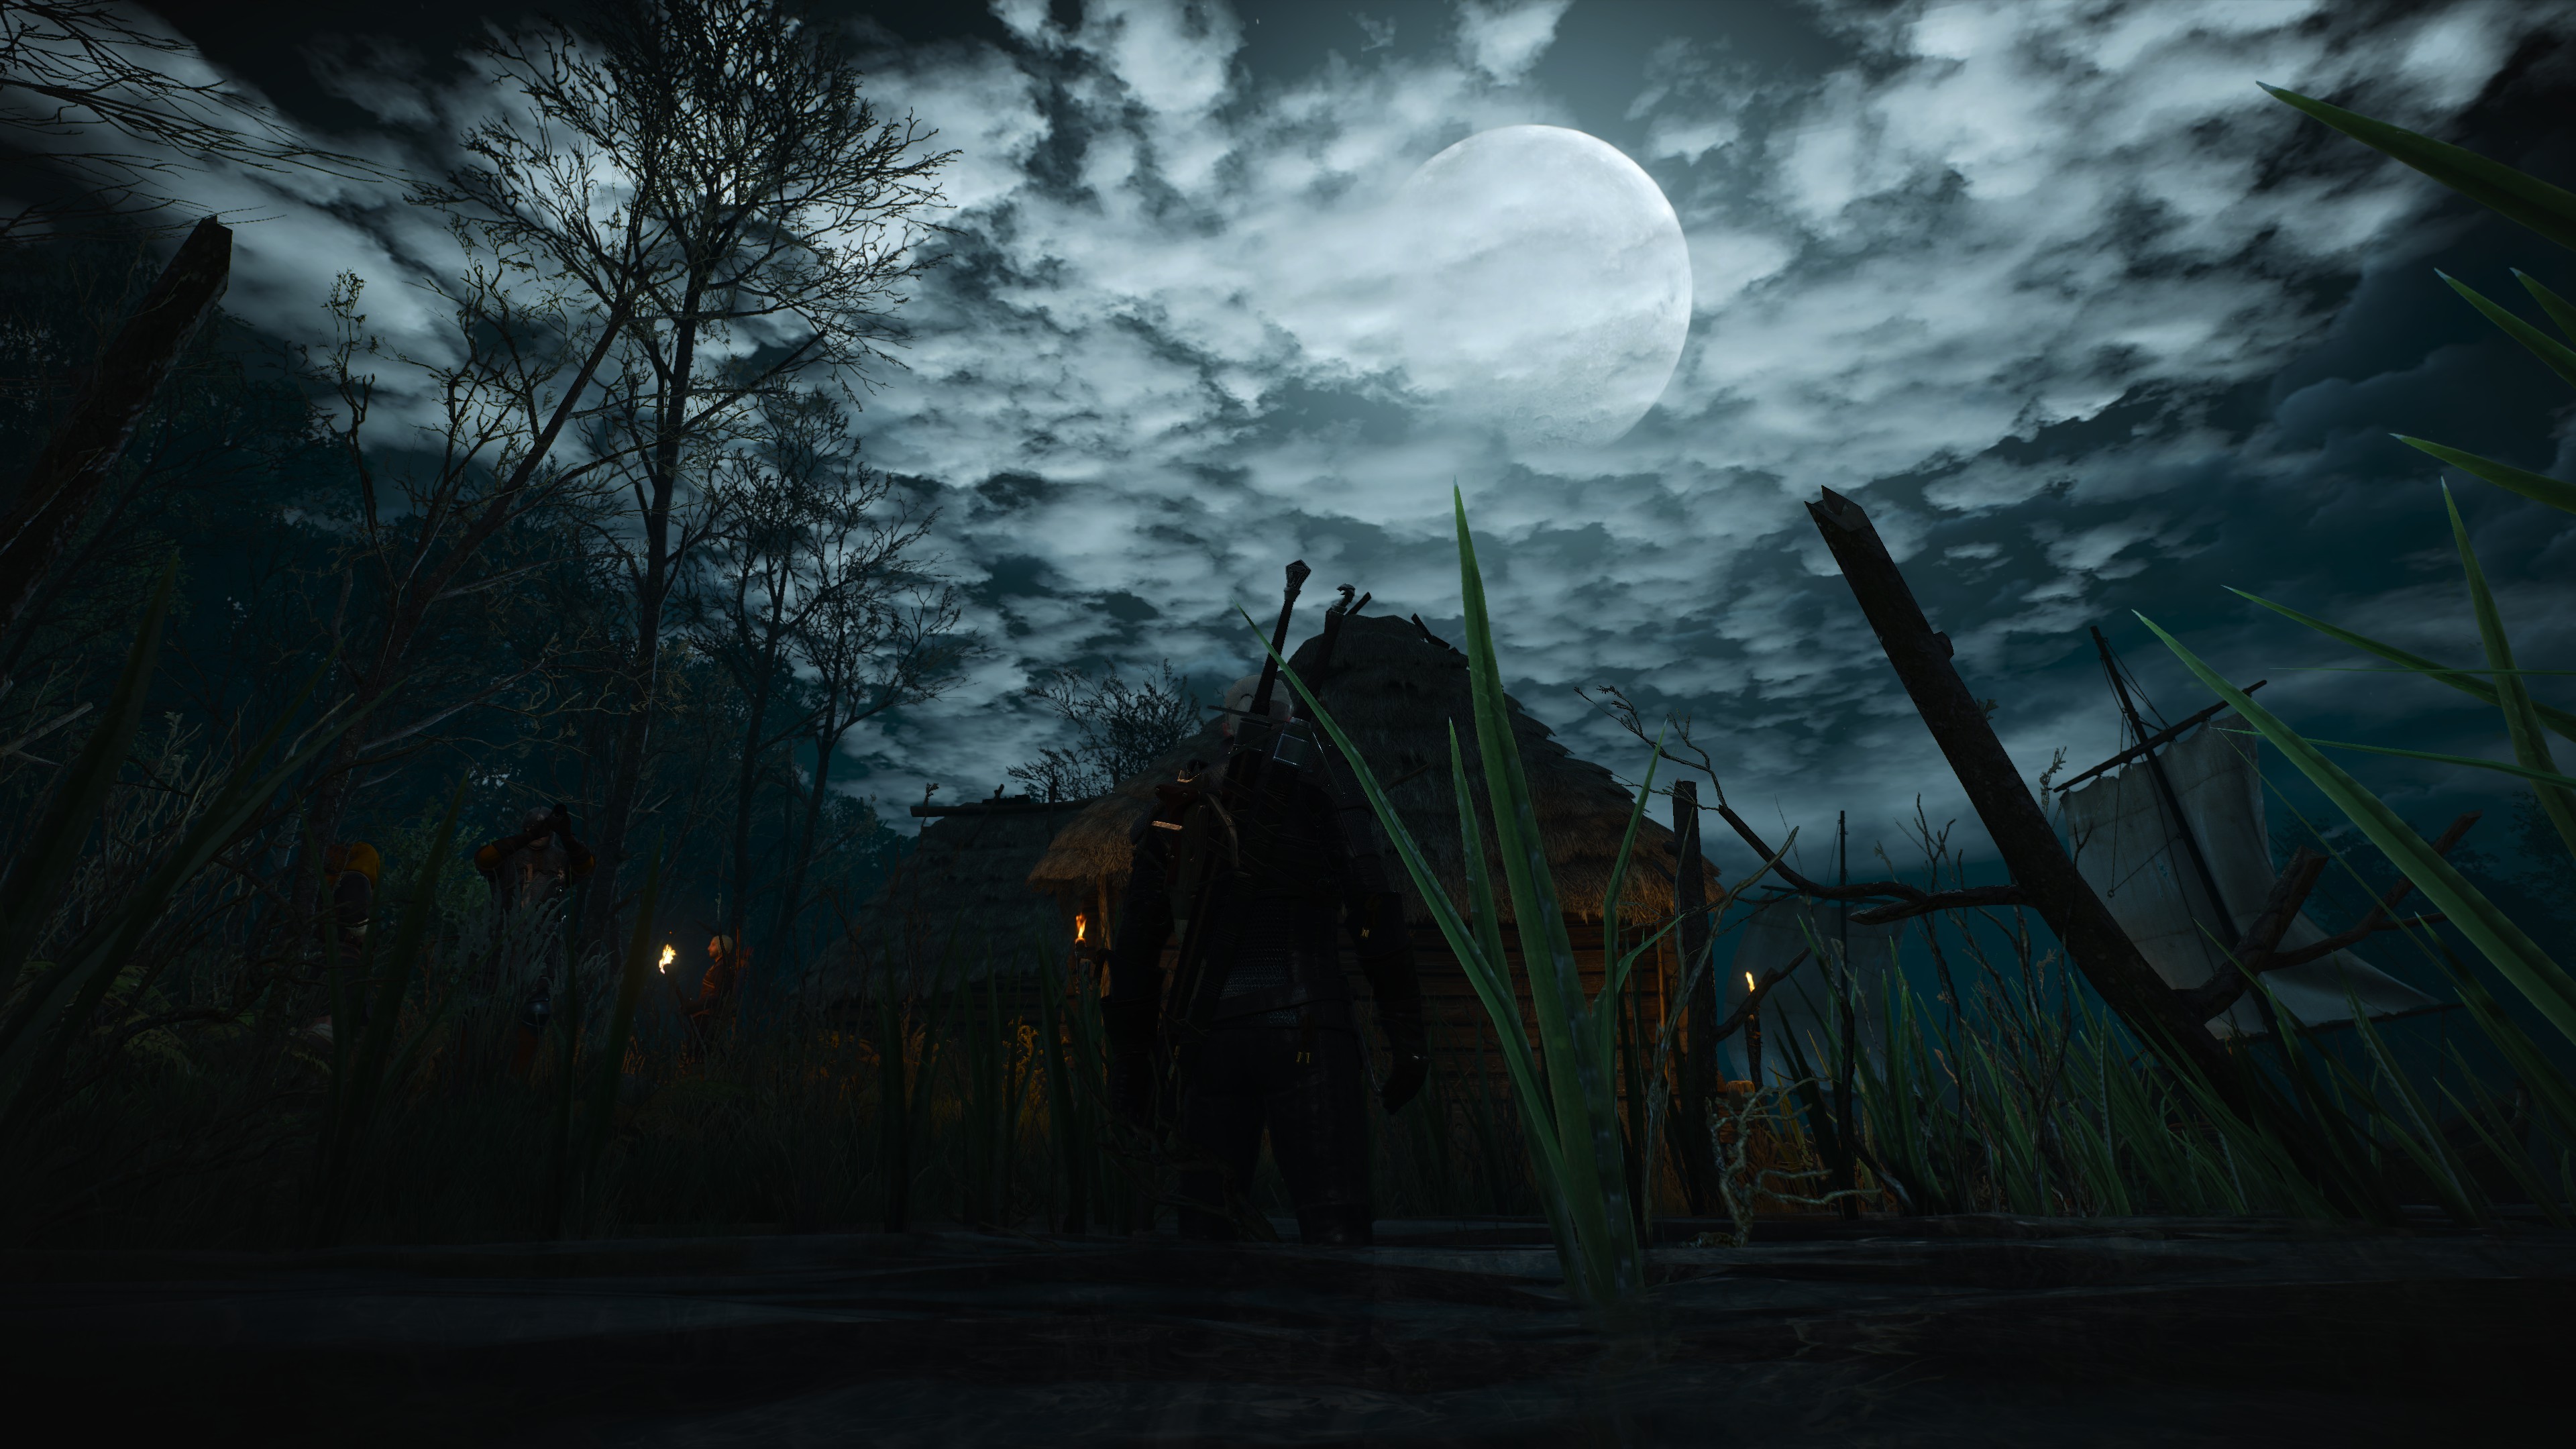 General 3840x2160 video games screen shot Moon The Witcher 3: Wild Hunt RPG PC gaming